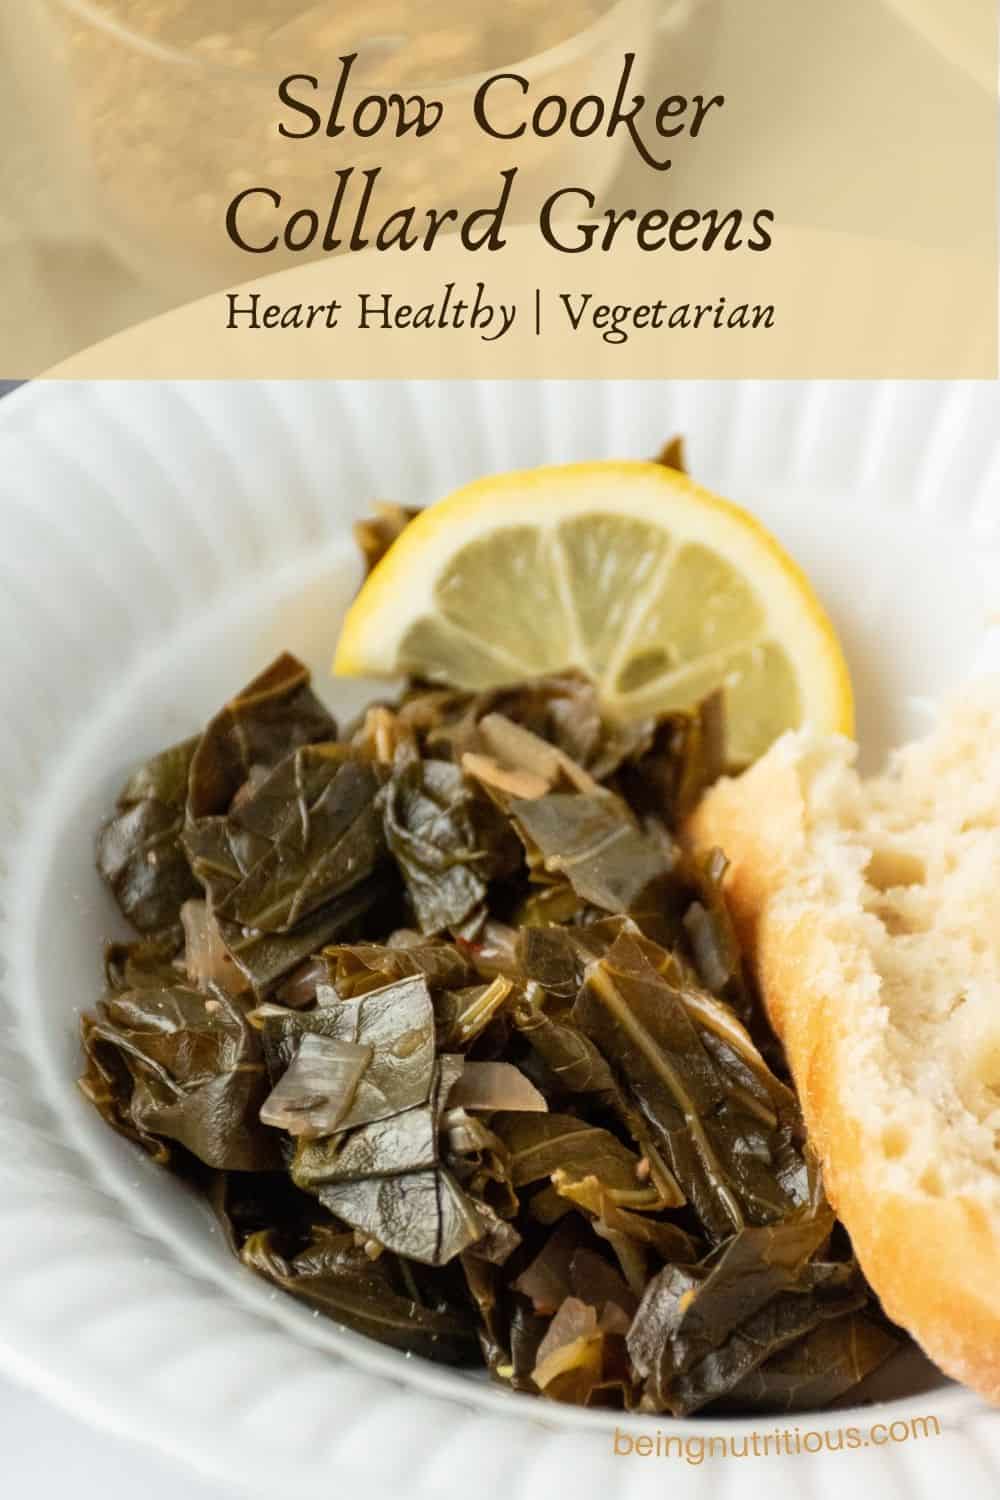 Bowl with collard greens and crusty bread, garnished with a lemon slice. Text overlay: Slow Cooker Collard Greens; heart healthy, vegetarian.